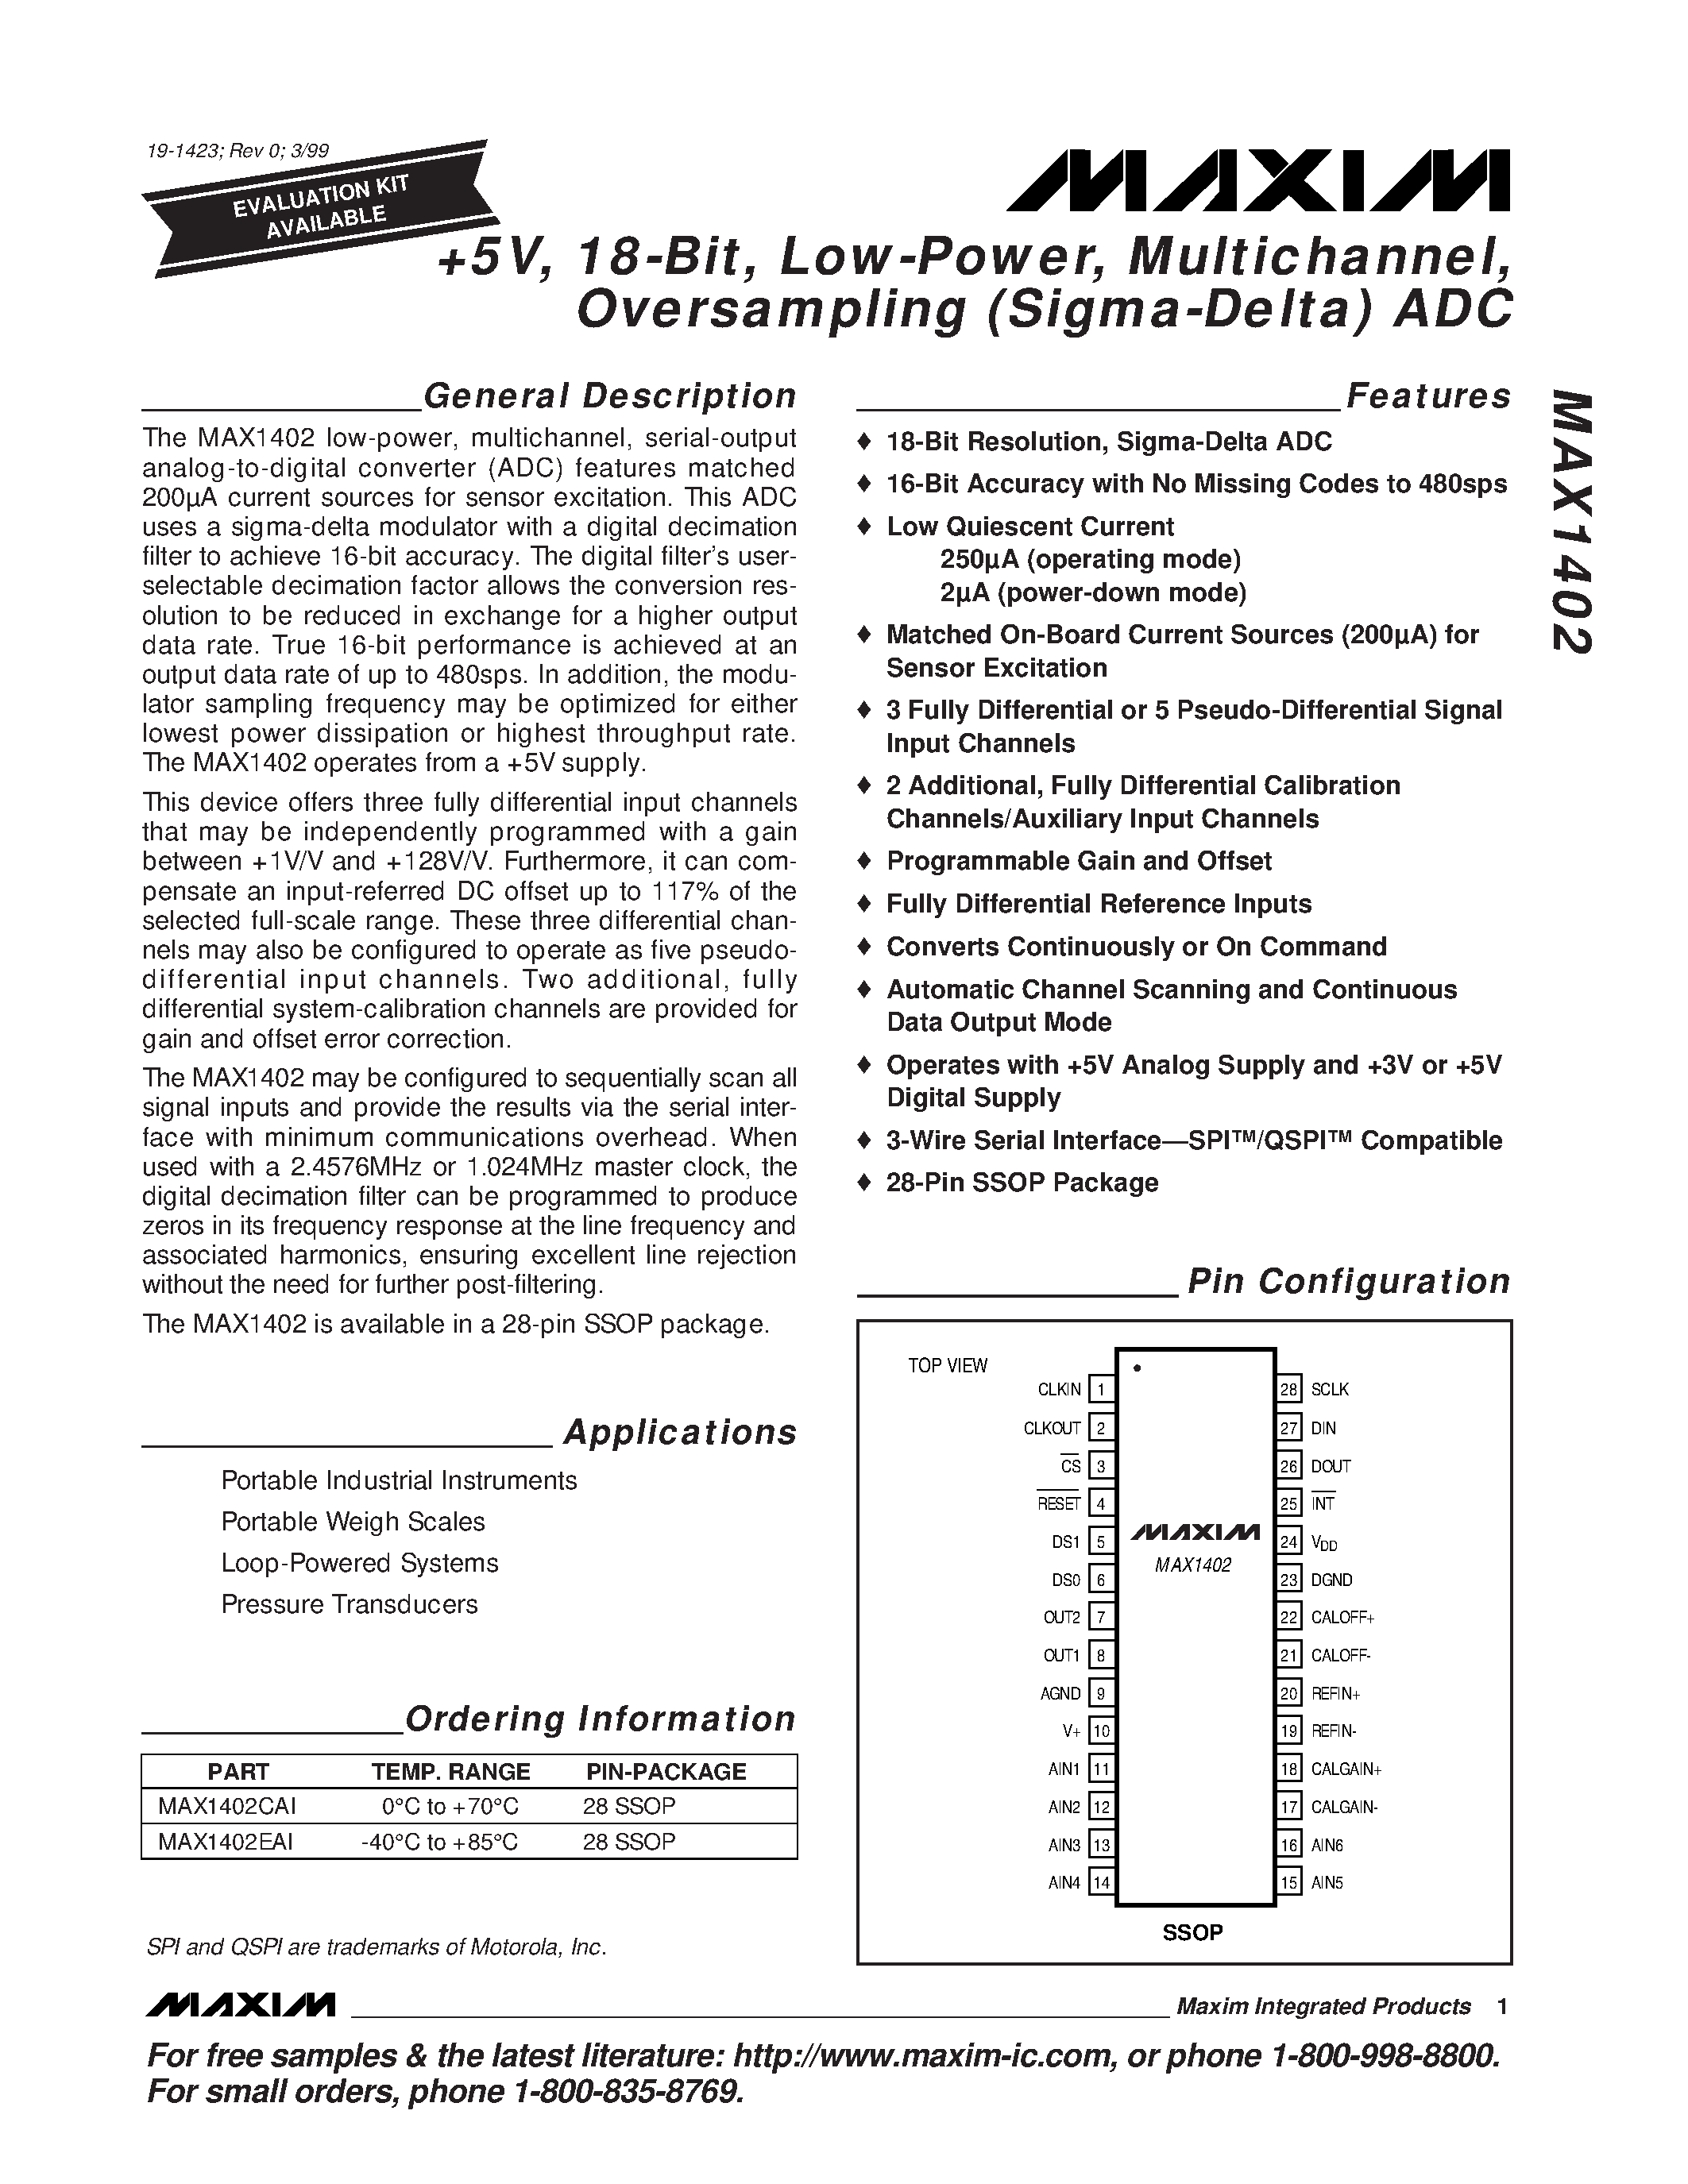 Datasheet MAX1402CAI - +5V / 18-Bit / Low-Power / Multichannel / Oversampling Sigma-Delta ADC page 1